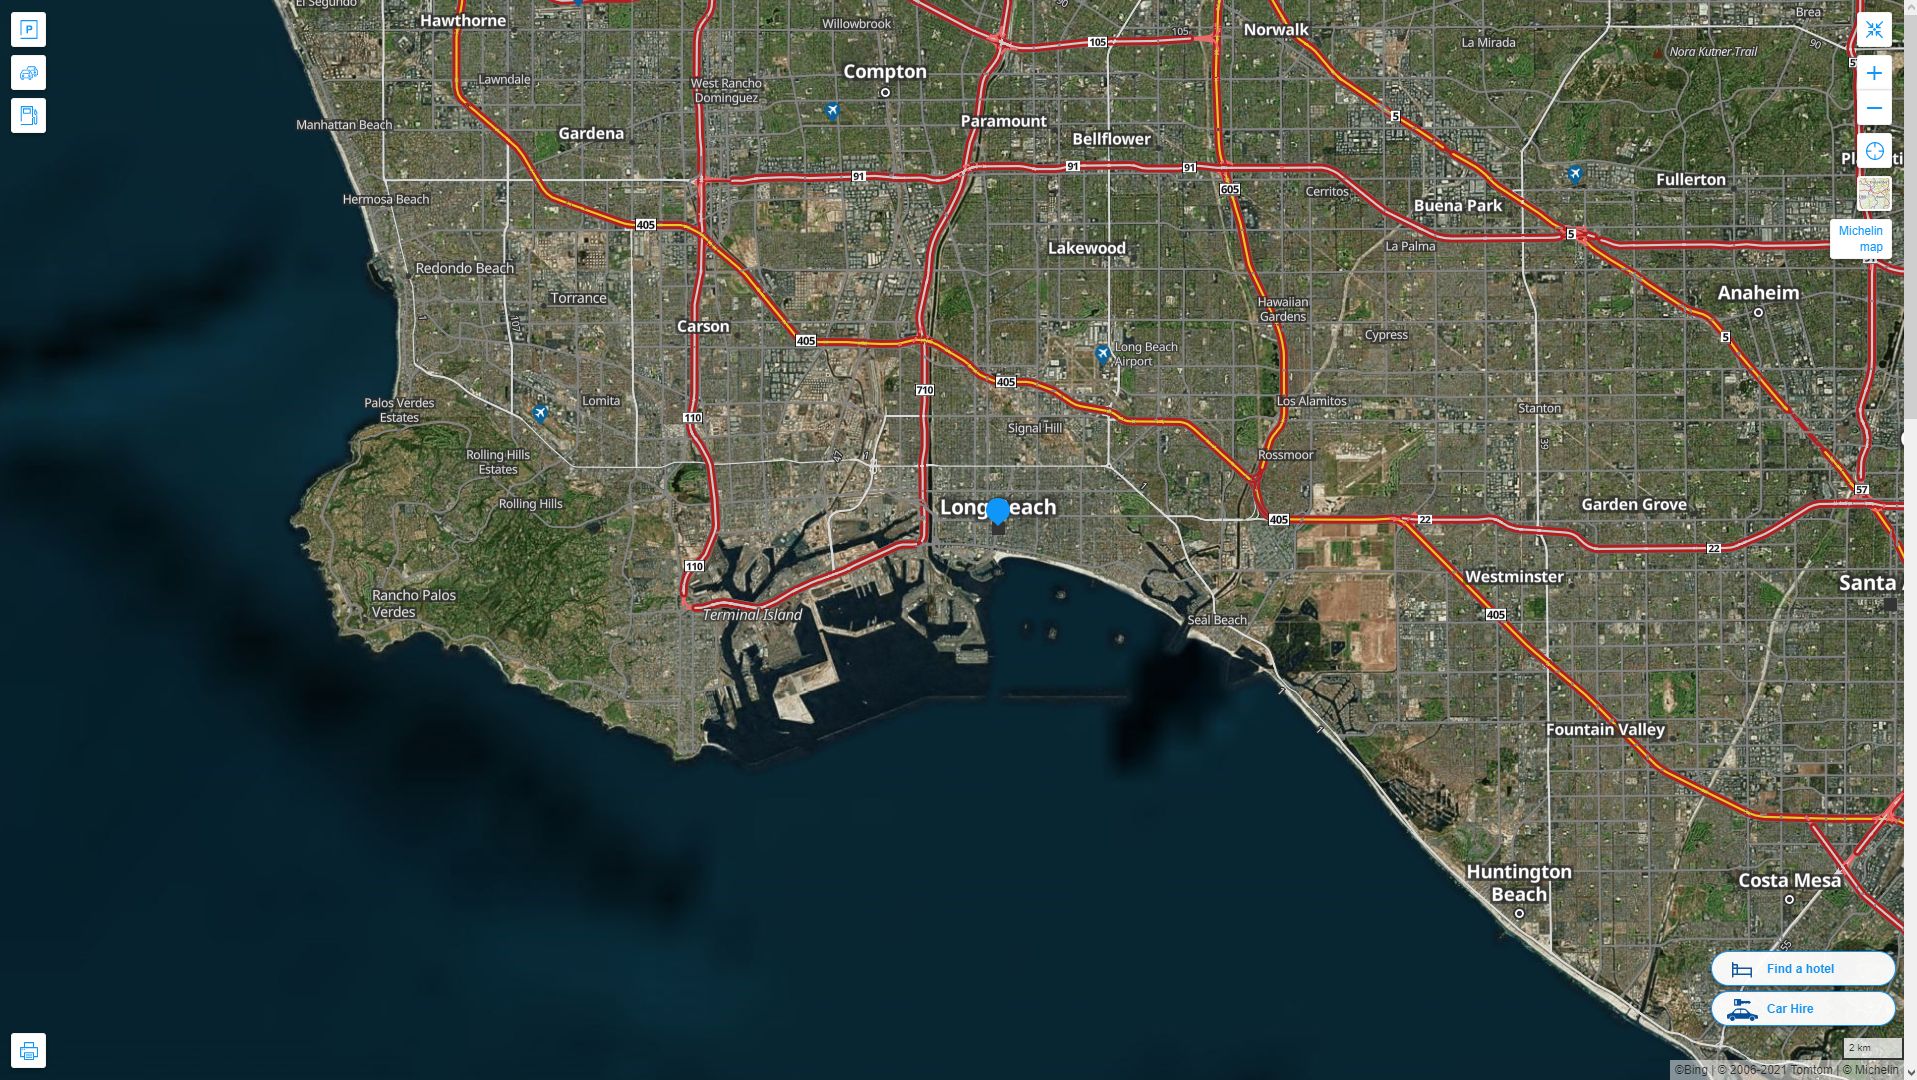 Long Beach California Highway and Road Map with Satellite View